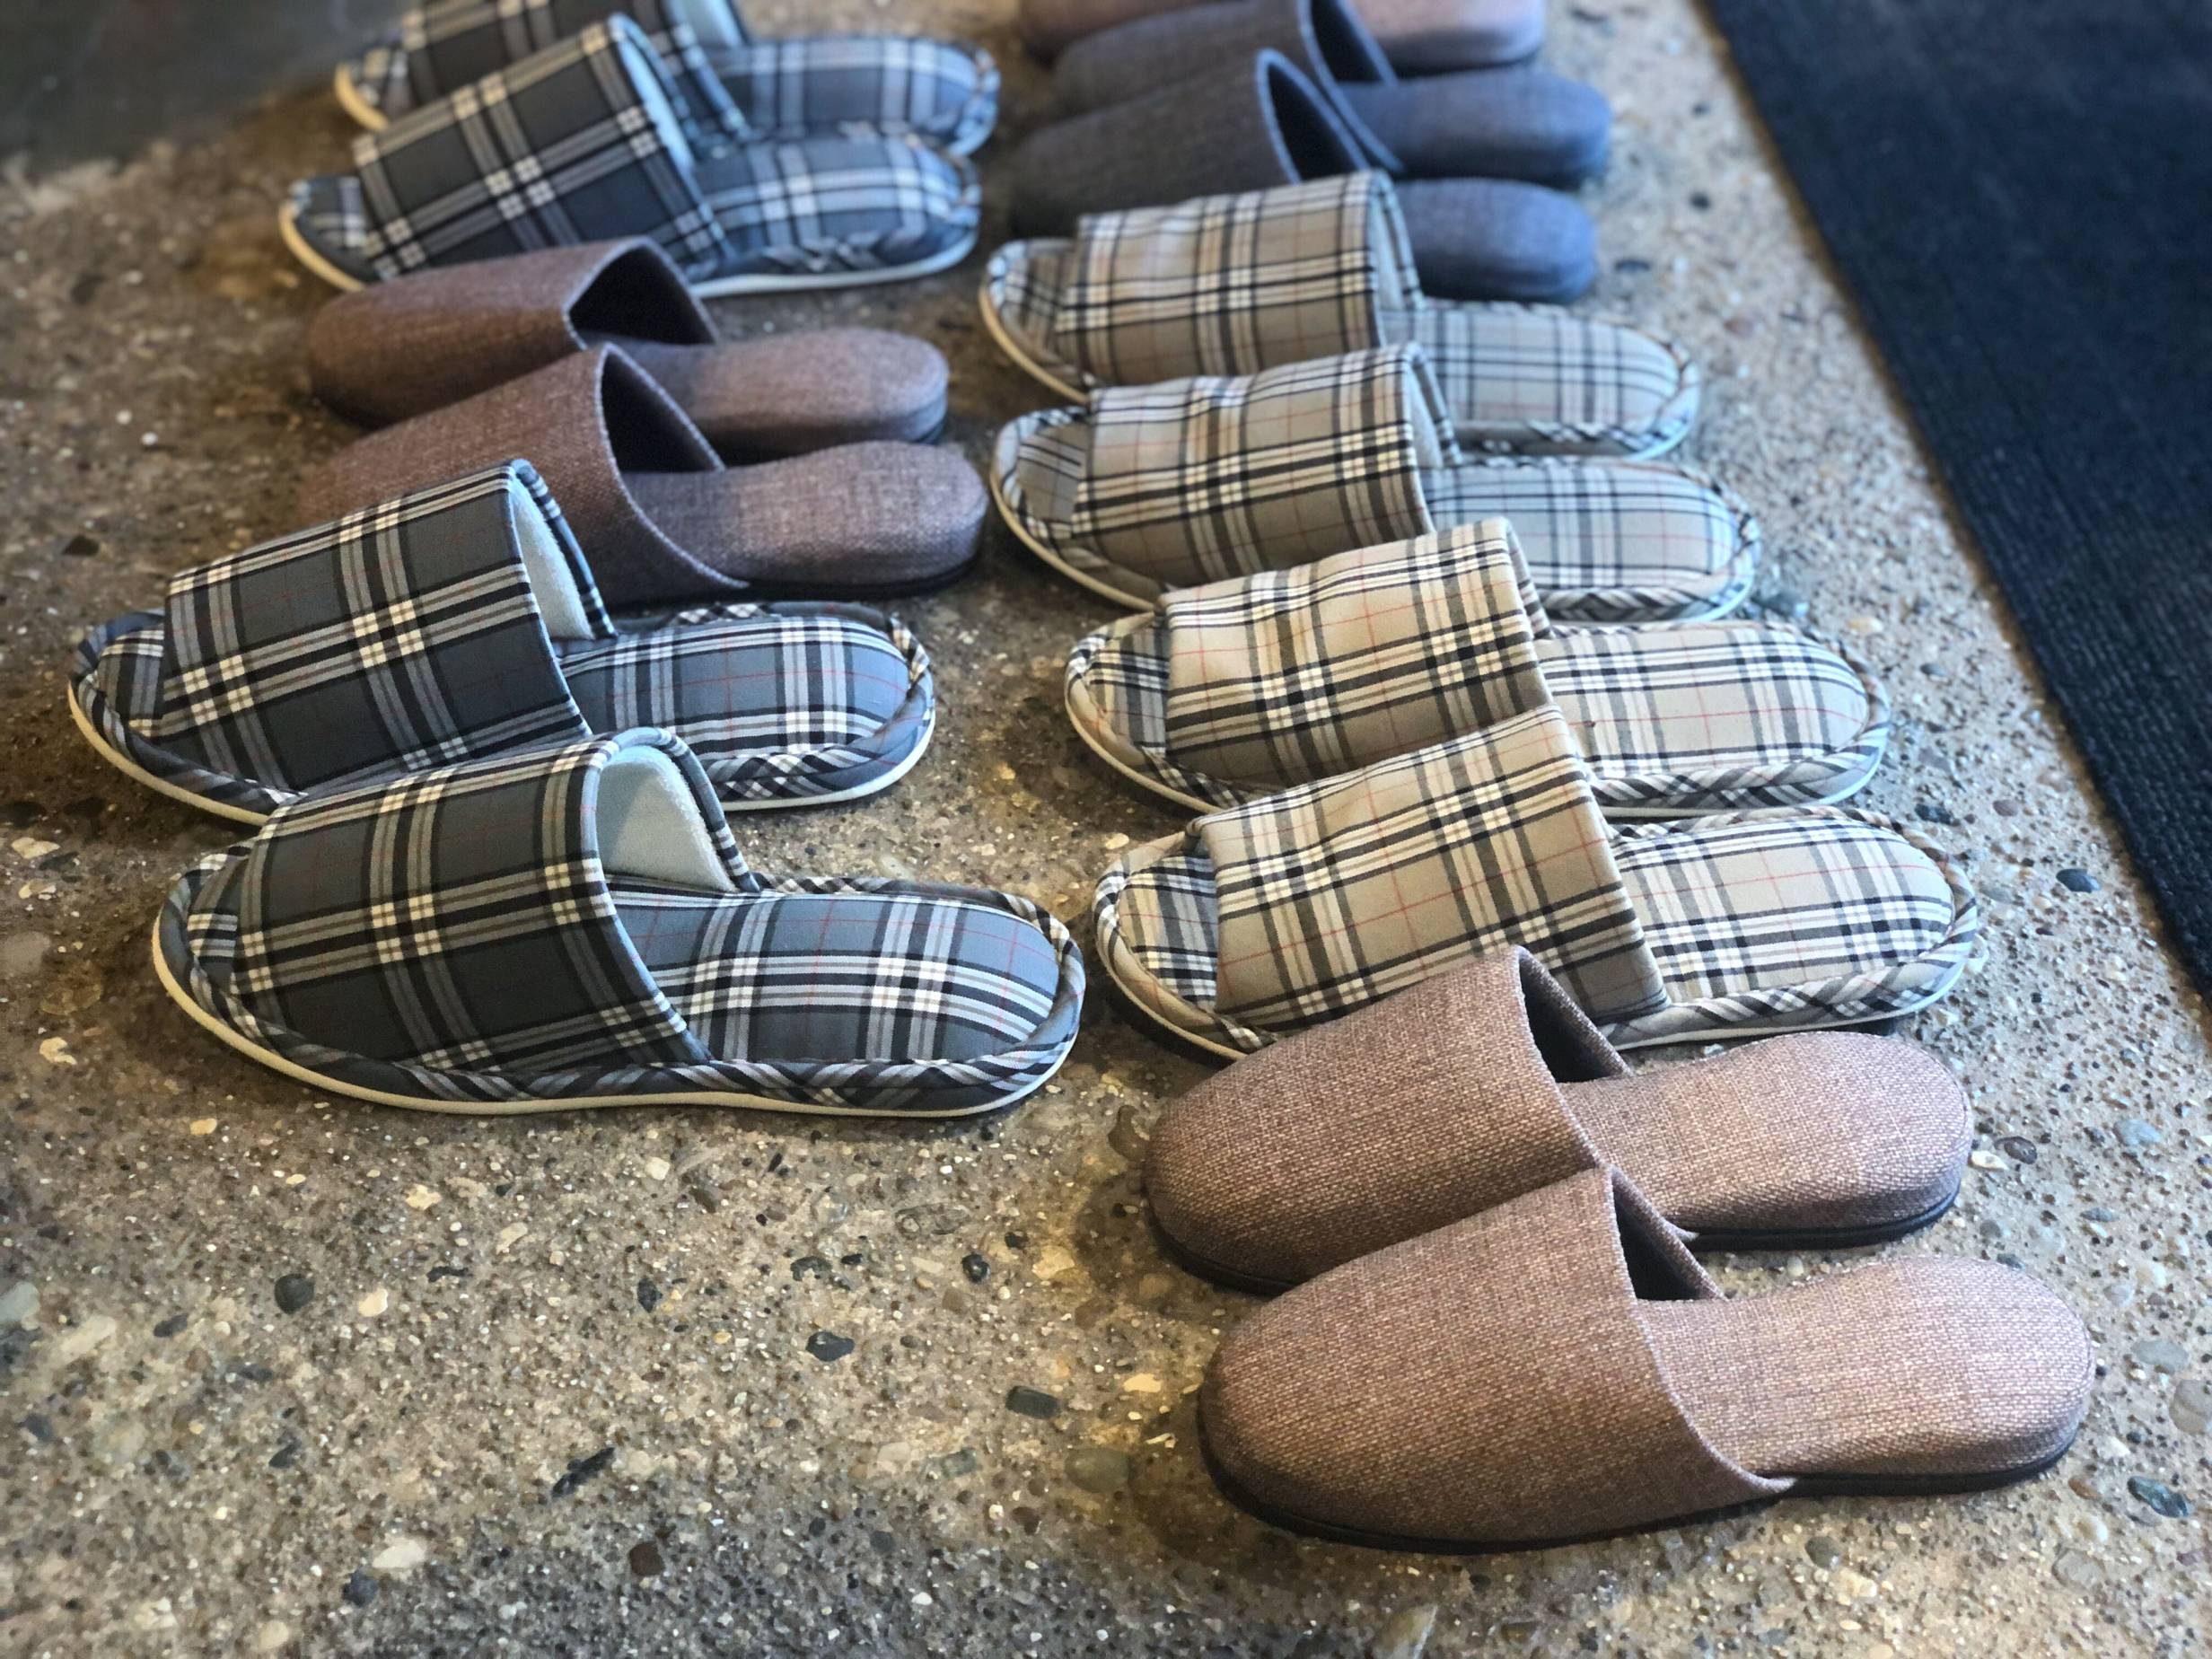 Pairs of slippers, plaid and plain, lined up on spotty floor. Photo by Alyssa Buckley.